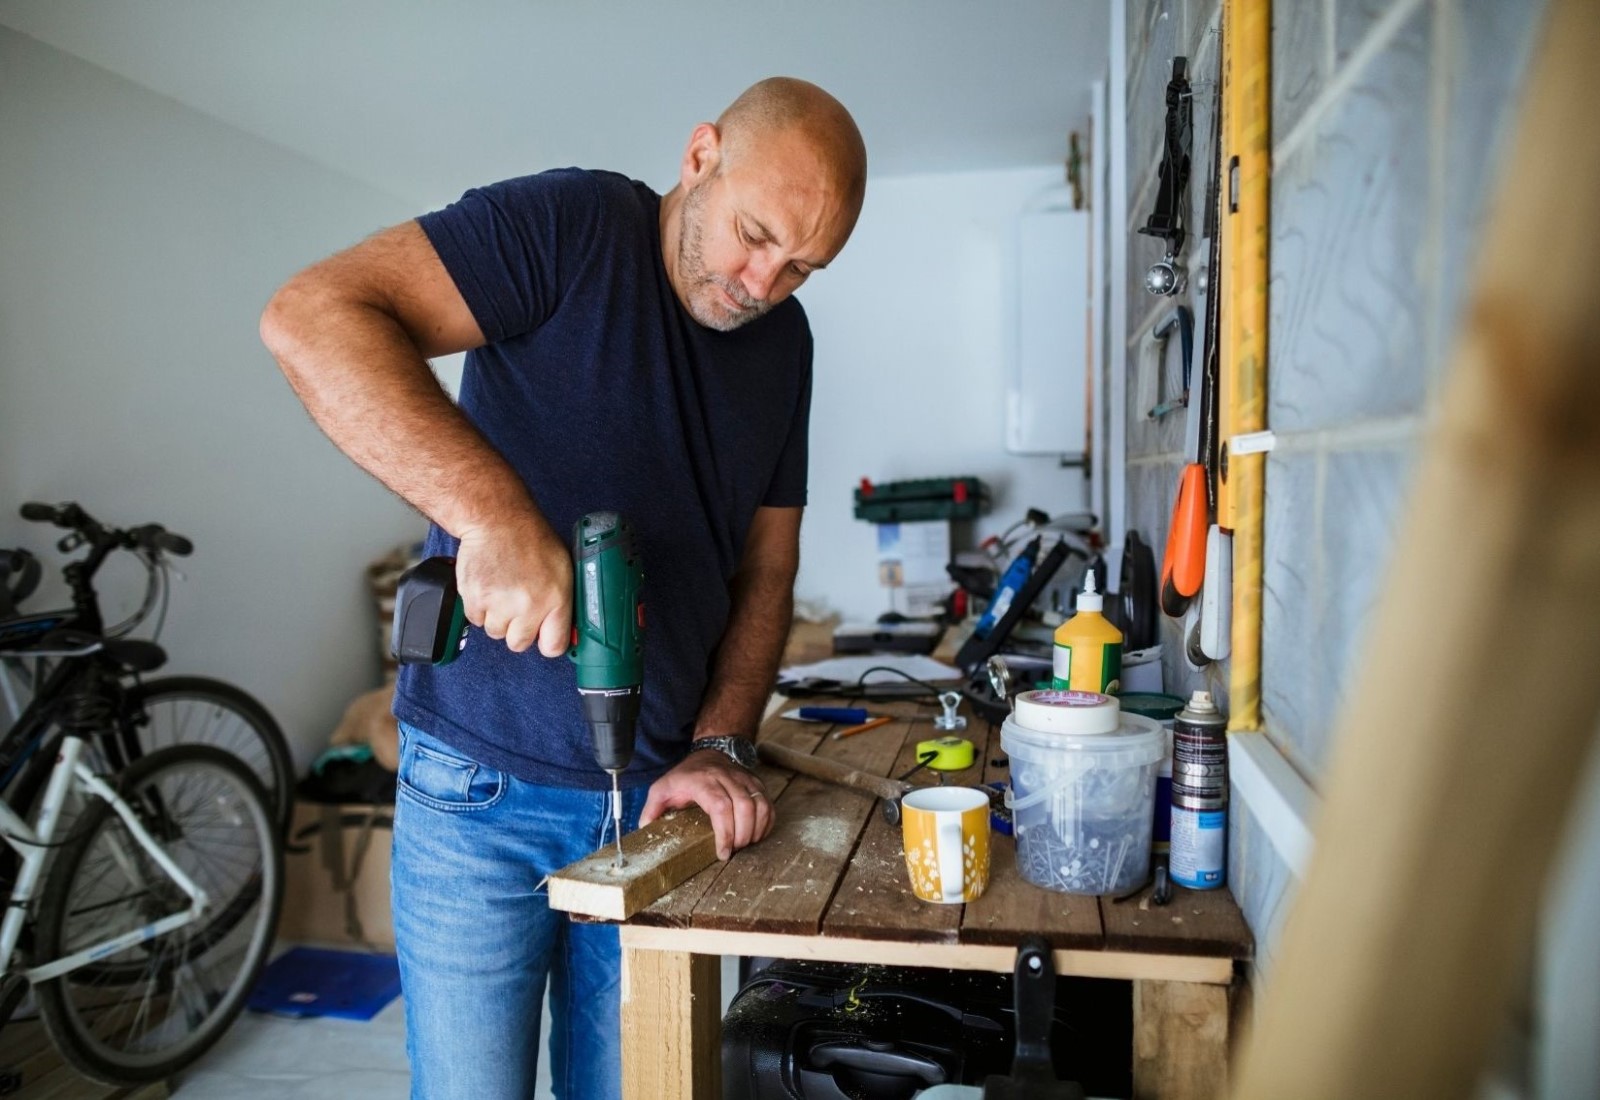 Finding a Reliable Handyman Service for Home Repairs